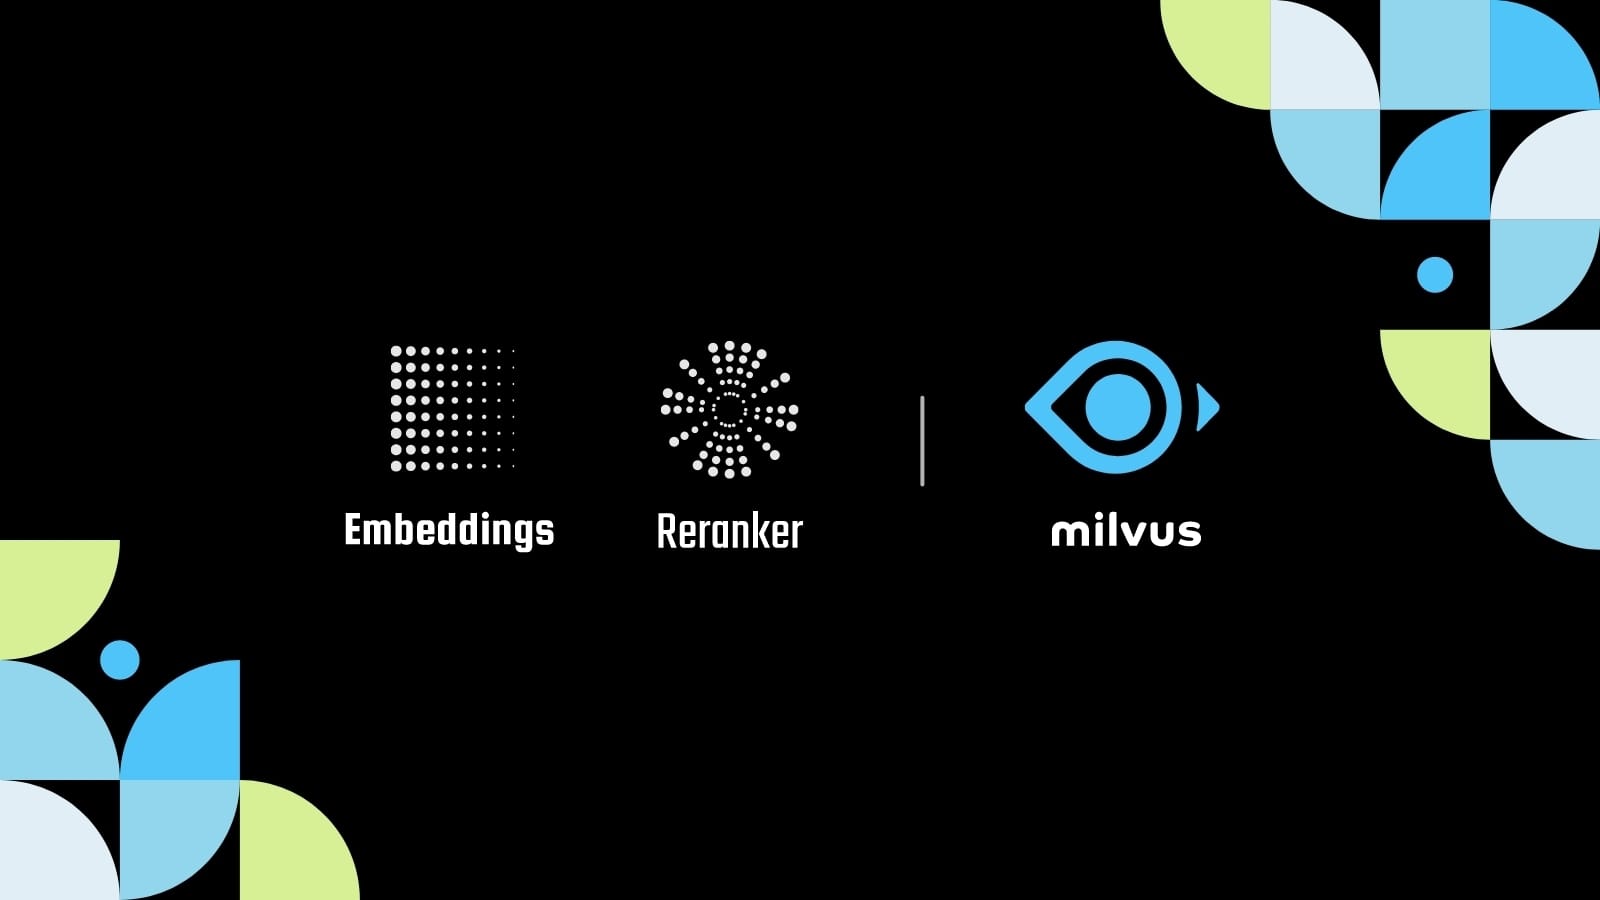 Black background with vivid geometric shapes on the sides and central logos "Embeddings," "Reranker," and "Milvus."